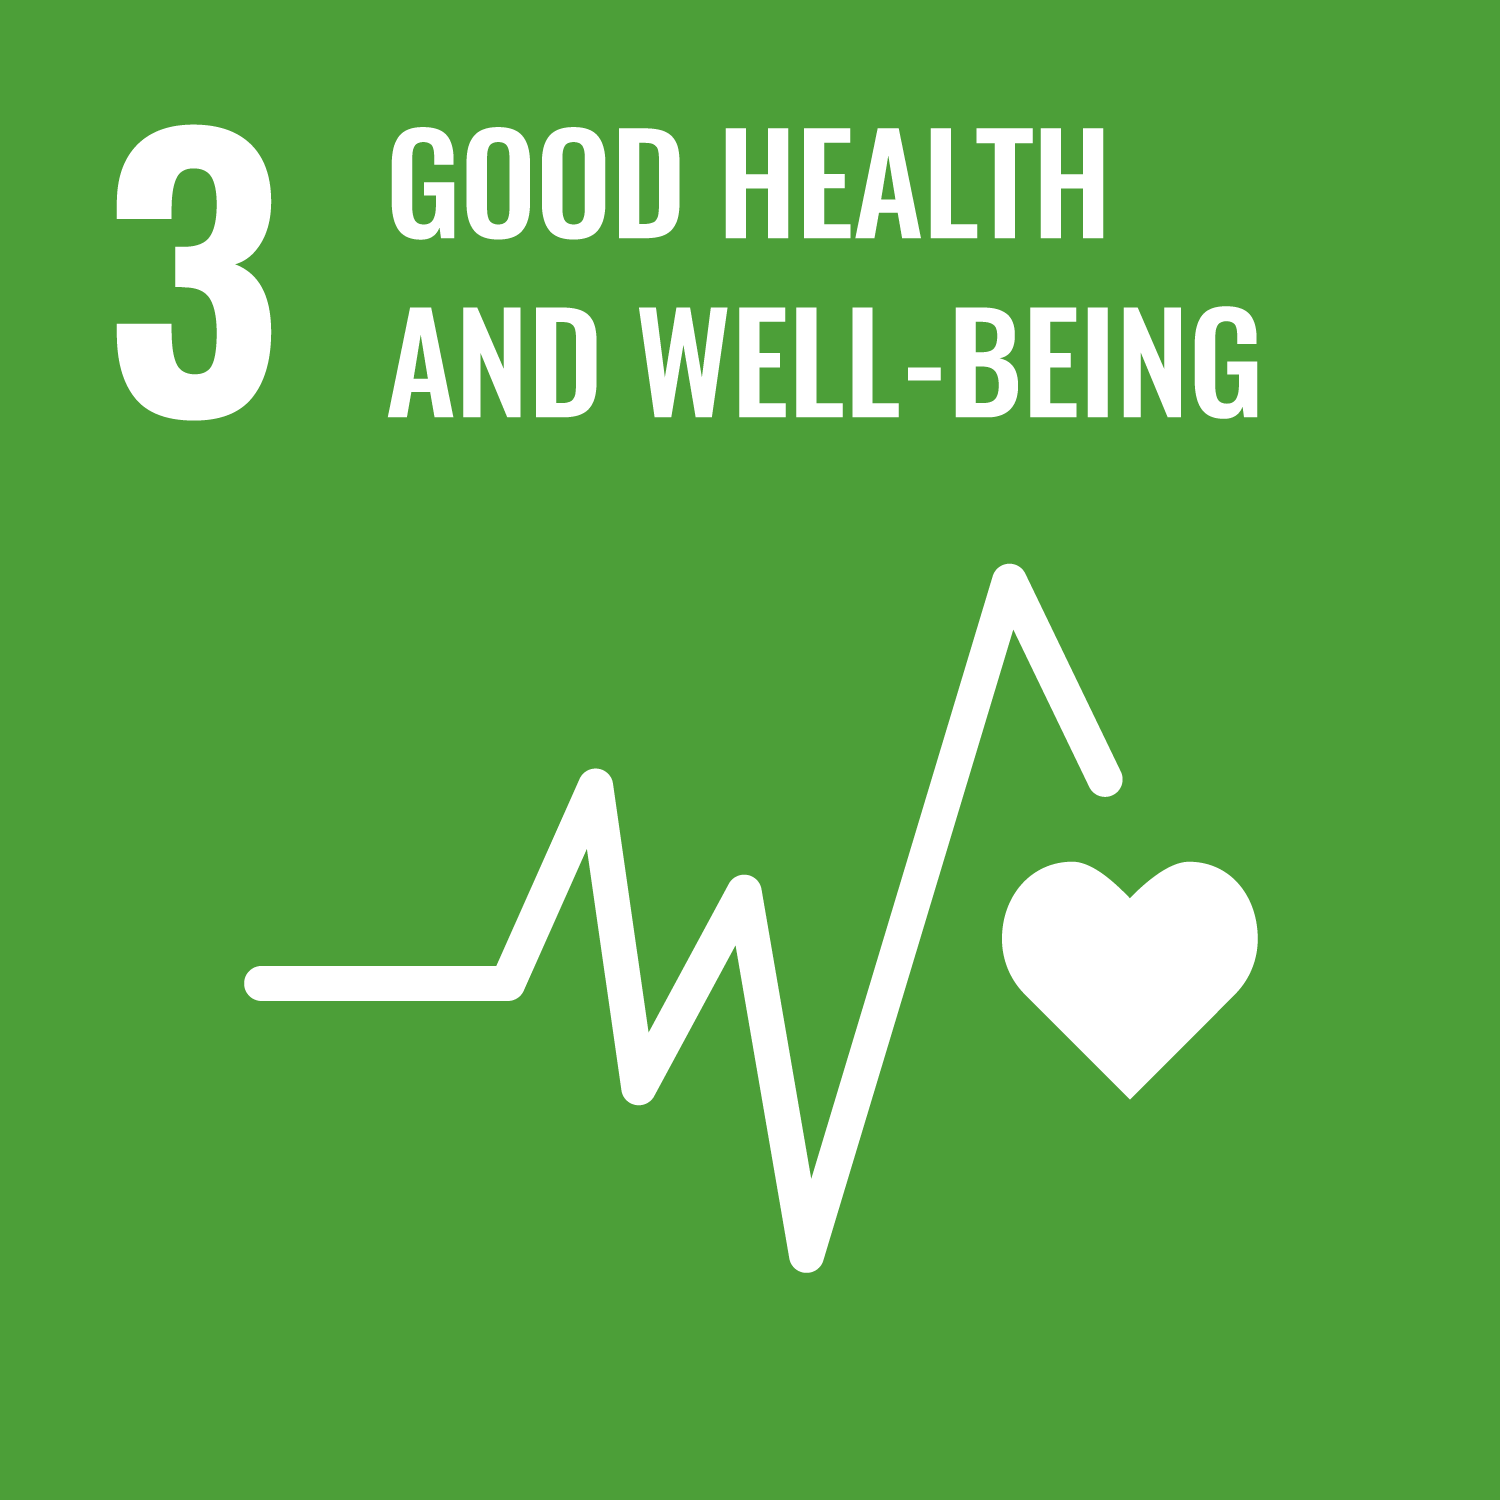 SDG 3: Good Health and Well-Being.